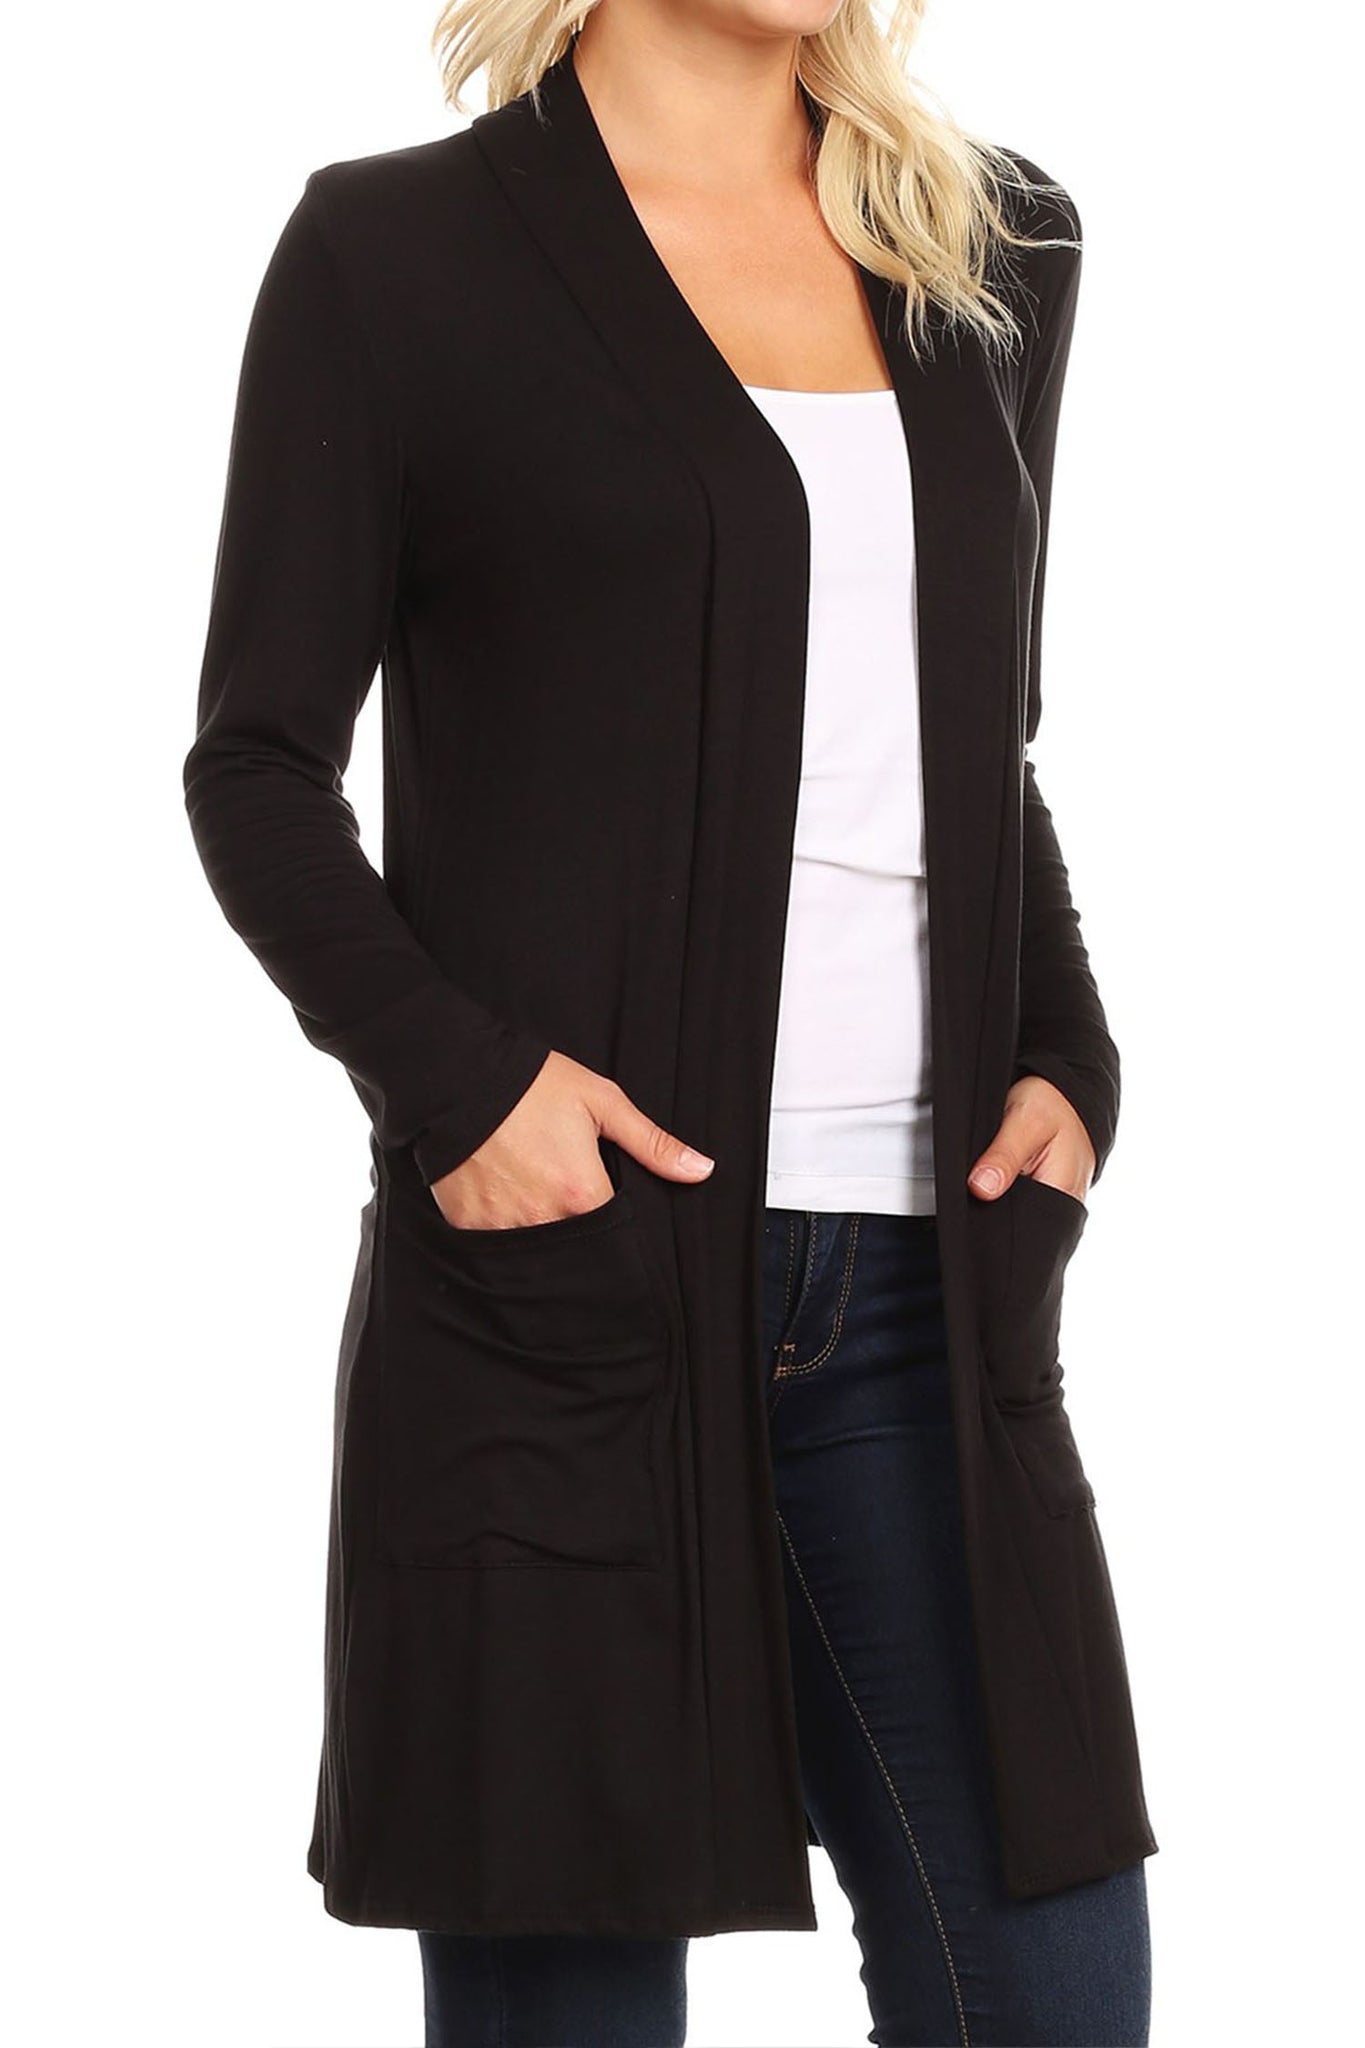 Women's Long Sleeves Loose Fit Open Front Side Pockets Solid Cardigan Made in USA - image 2 of 4